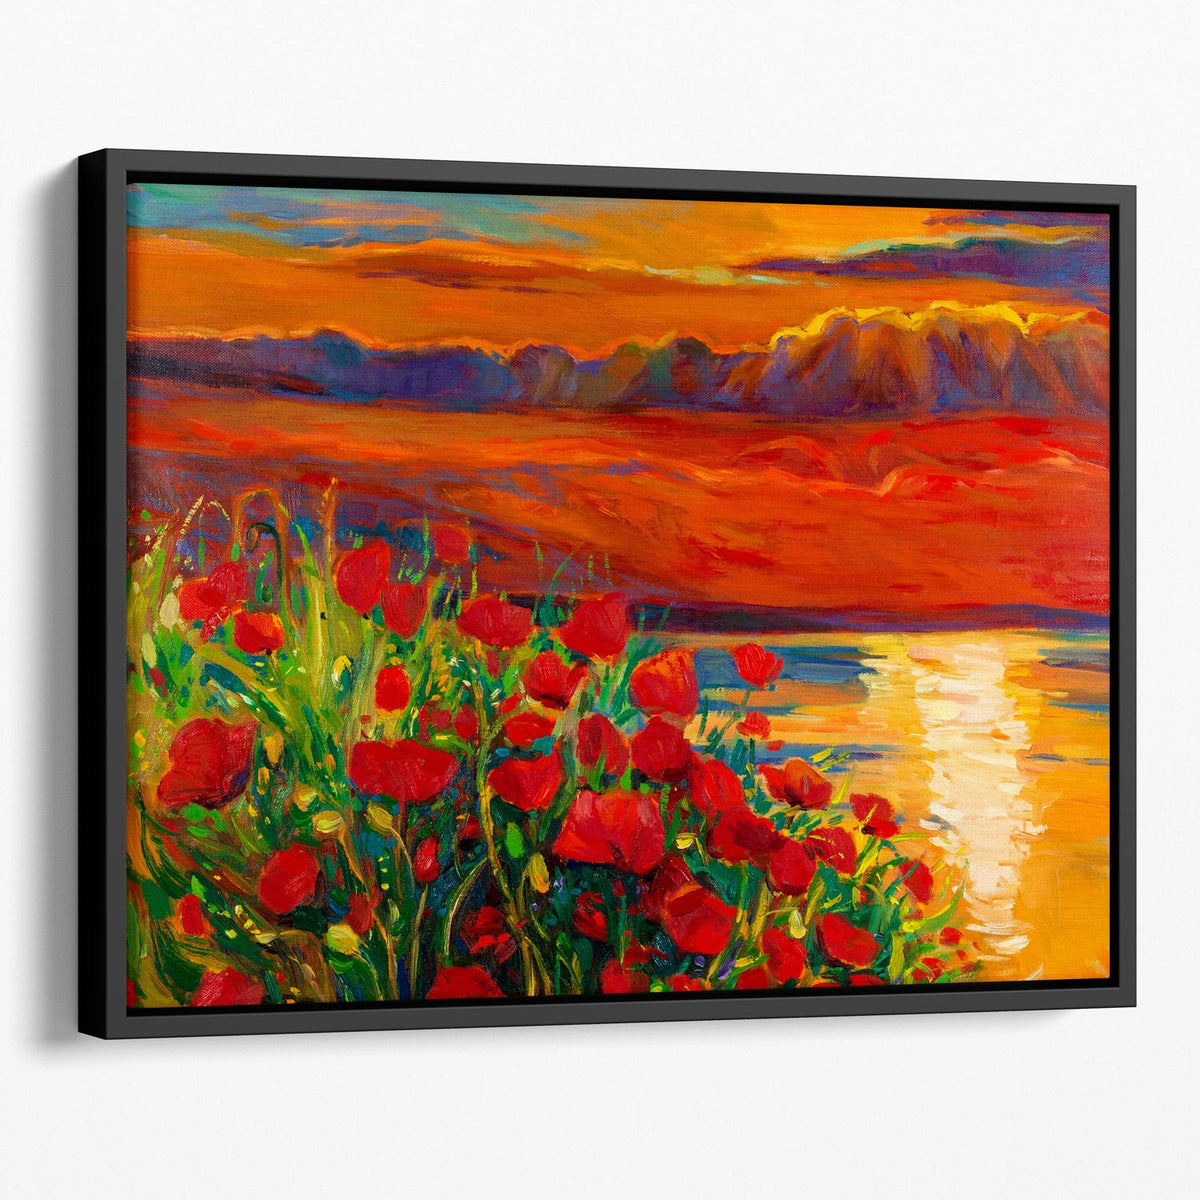 Sunset & Poppies Canvas Sets